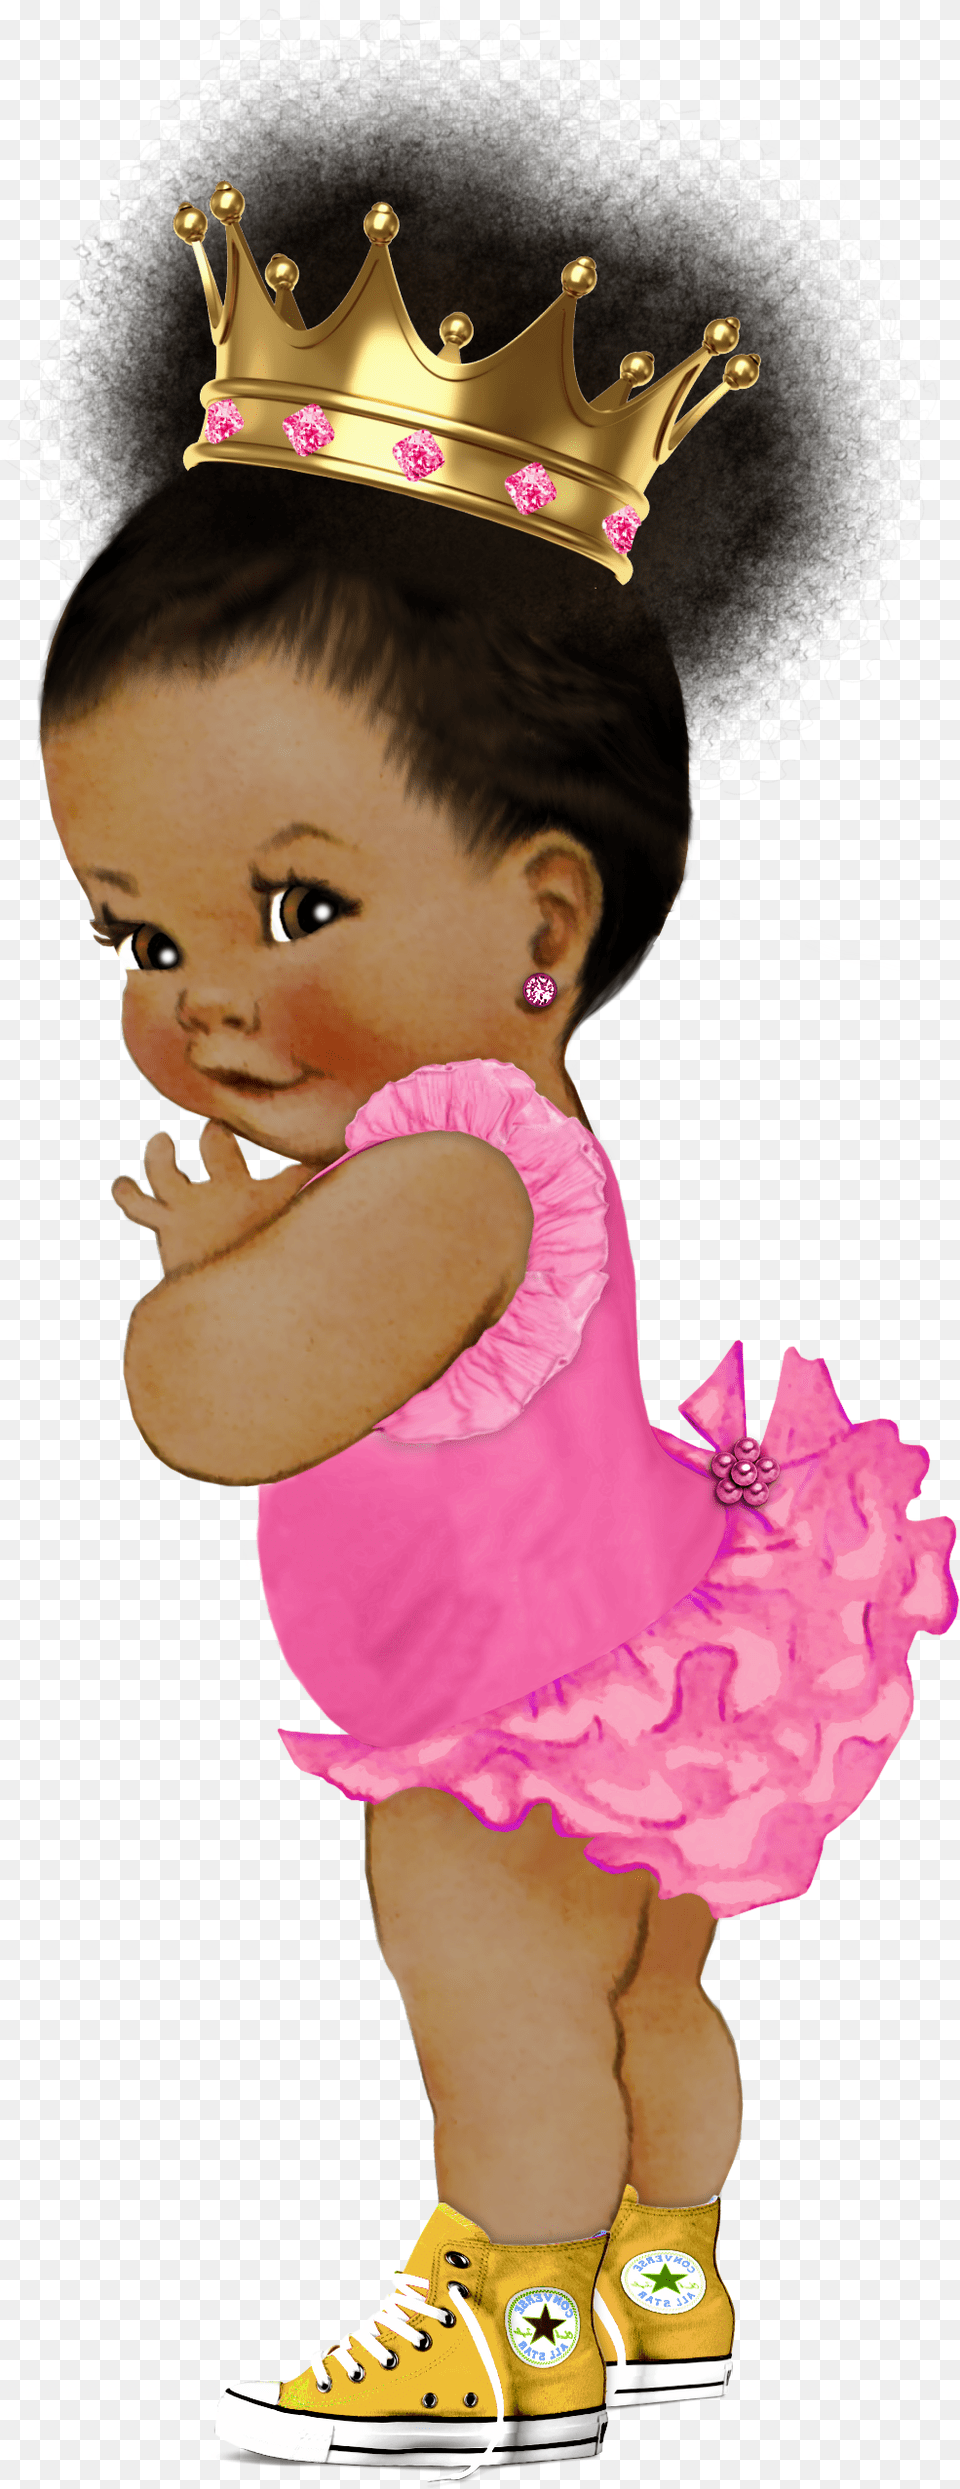 Afro Puff Baby, Accessories, Clothing, Footwear, Jewelry Png Image